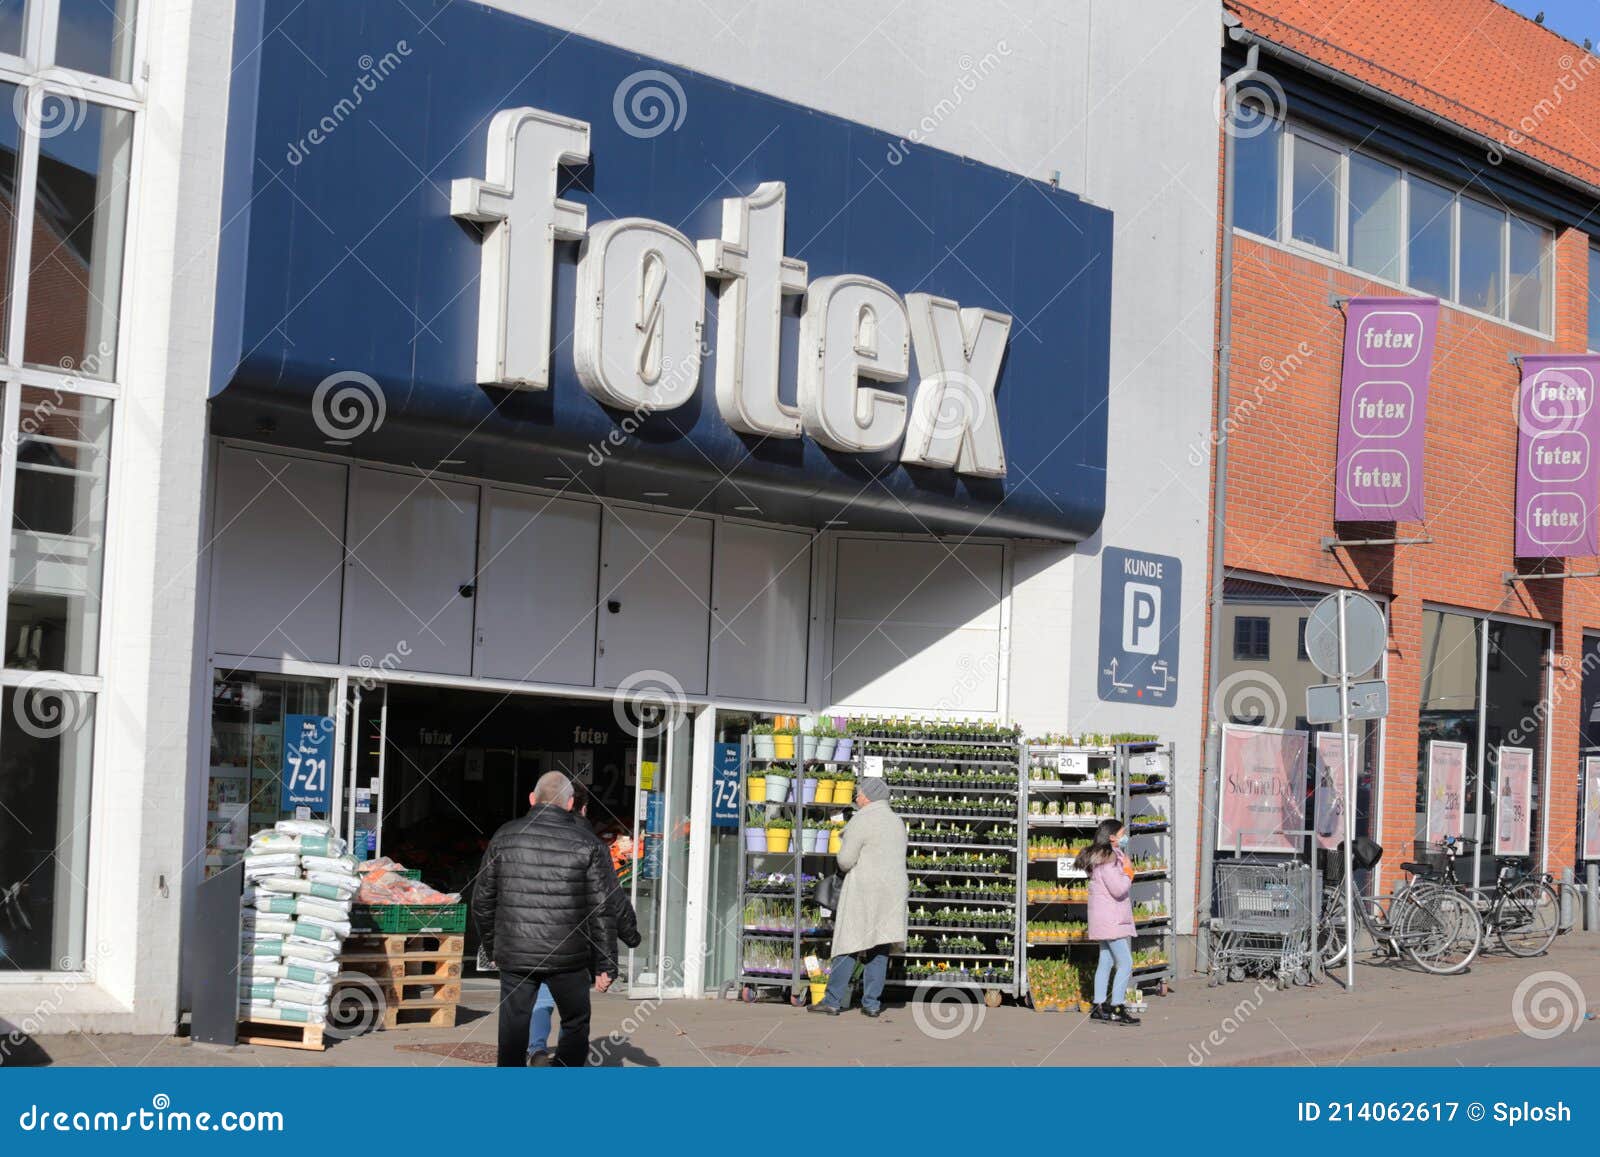 Føtex - Fotex Storefront Editorial Photography - of grocery, 214062617